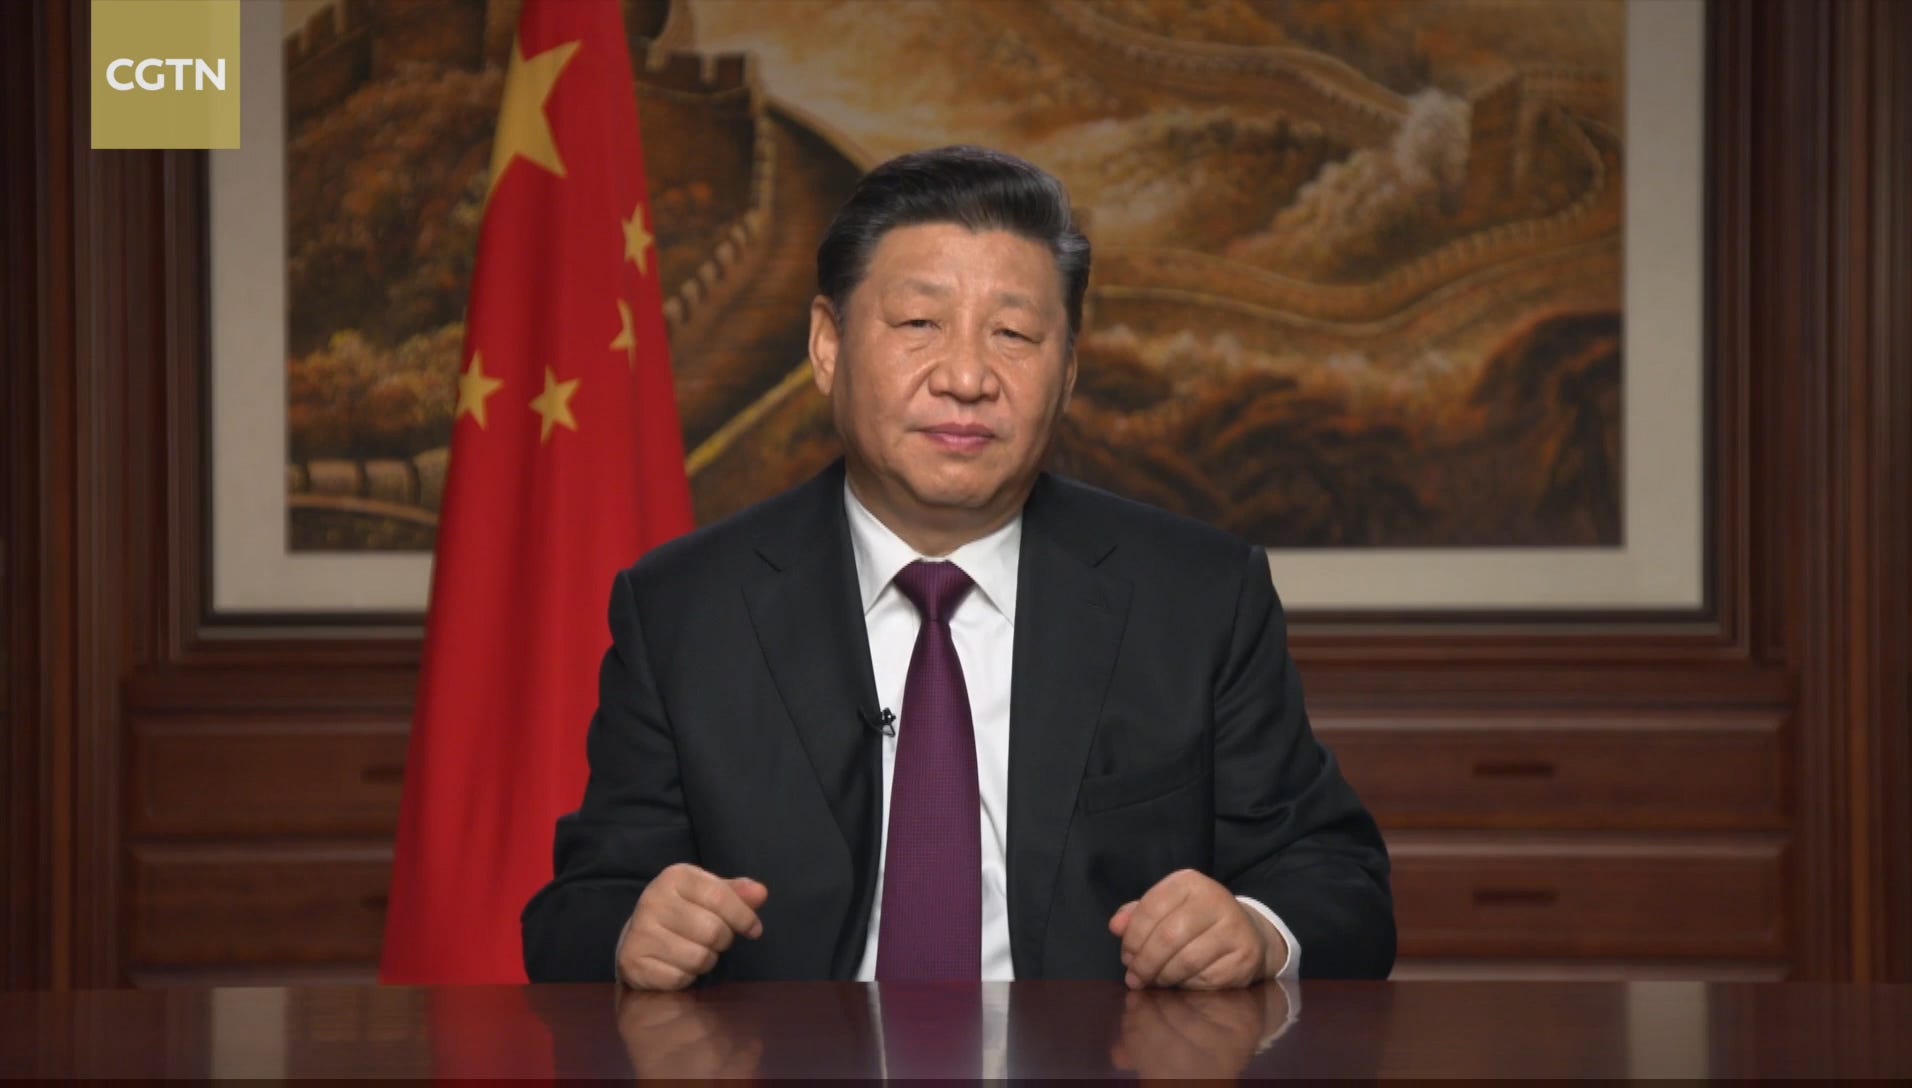 A picture of China president Xi Jingping sitting at a desk during the Chinese New Year in 2019.